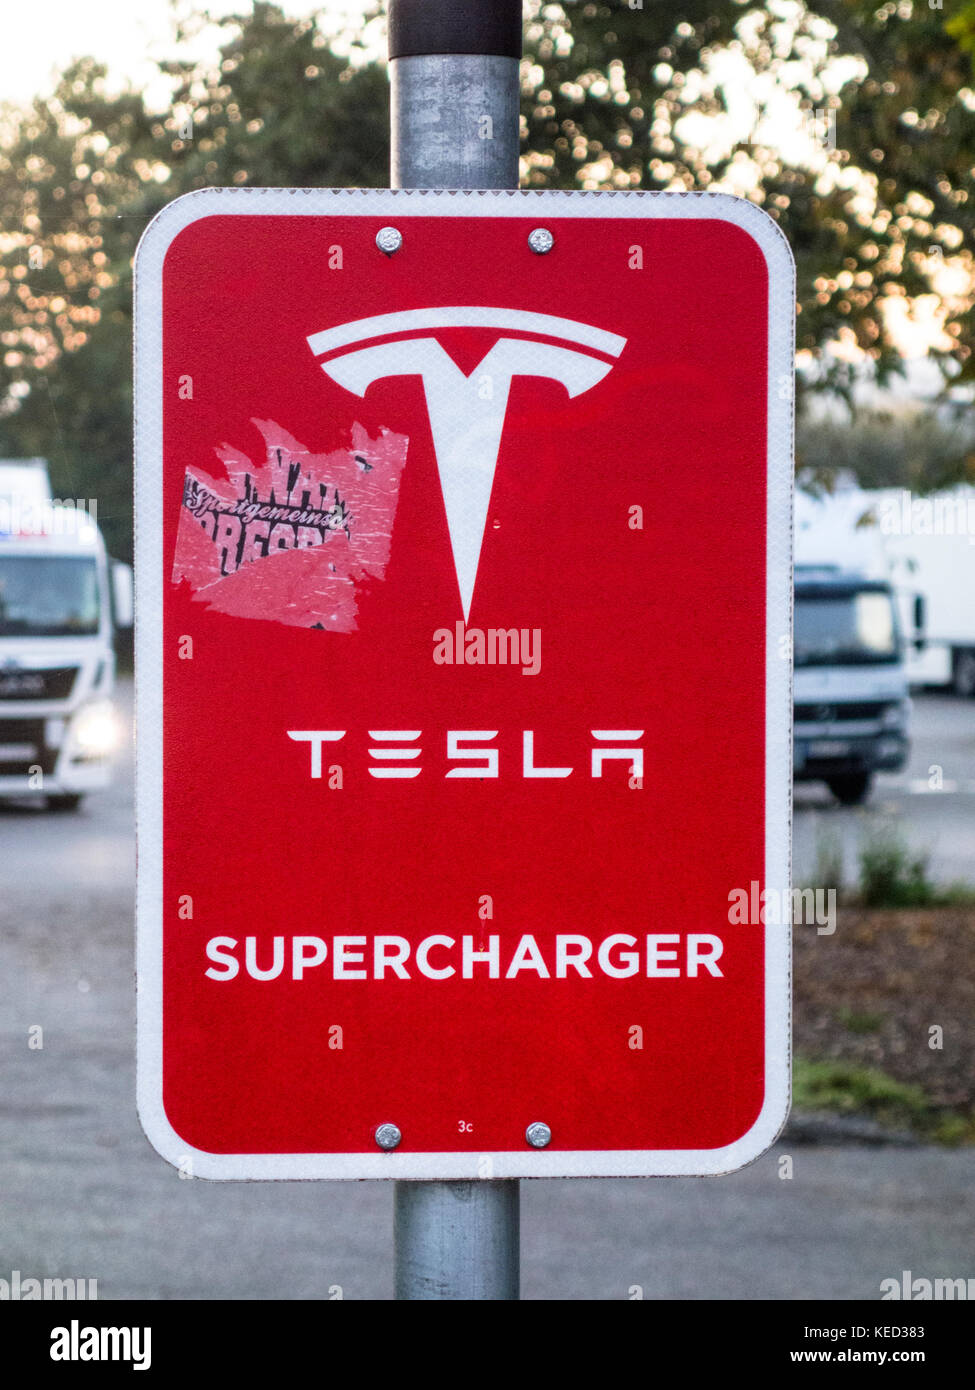 Tesla supercharger signboard at a petrol station in Bavaria, Southern Germany, October 2017 Stock Photo